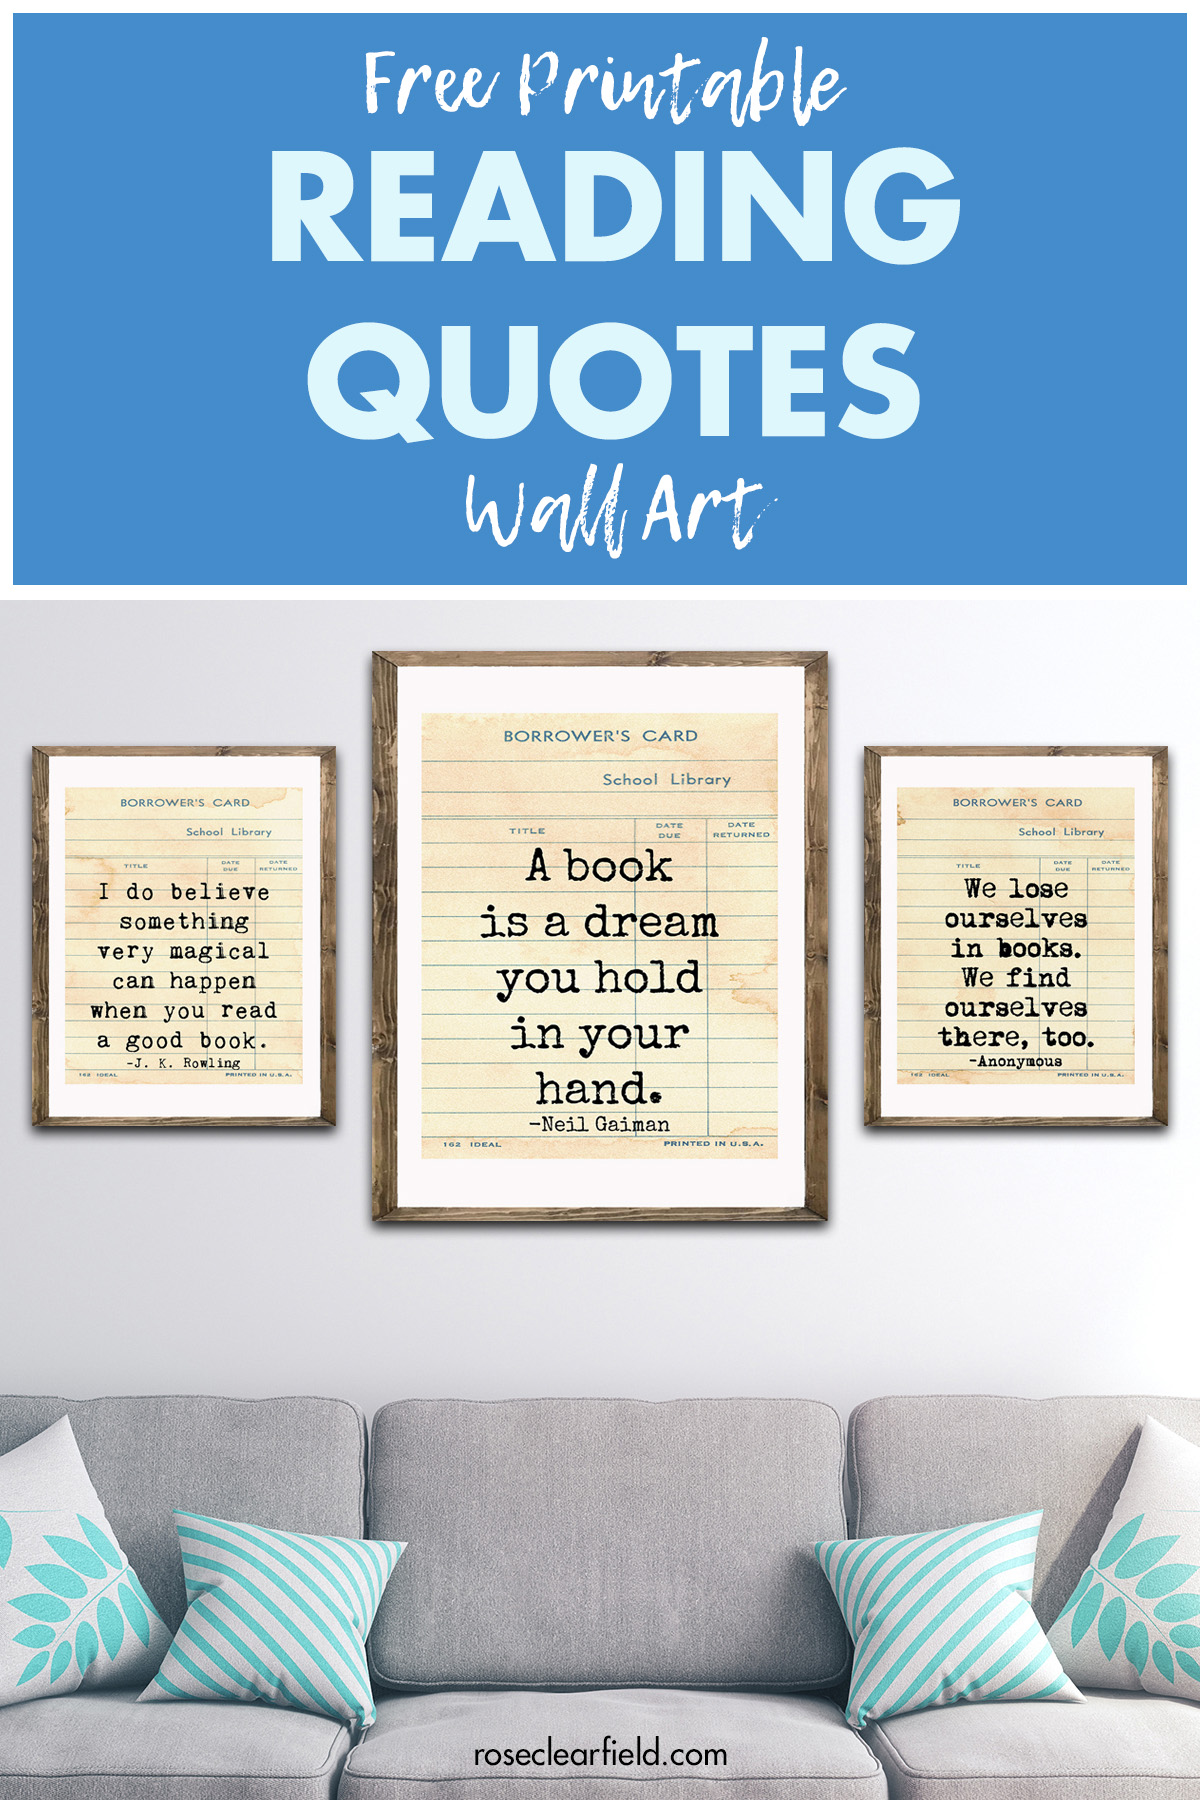 free-printable-library-card-reading-quotes-wall-art-rose-clearfield